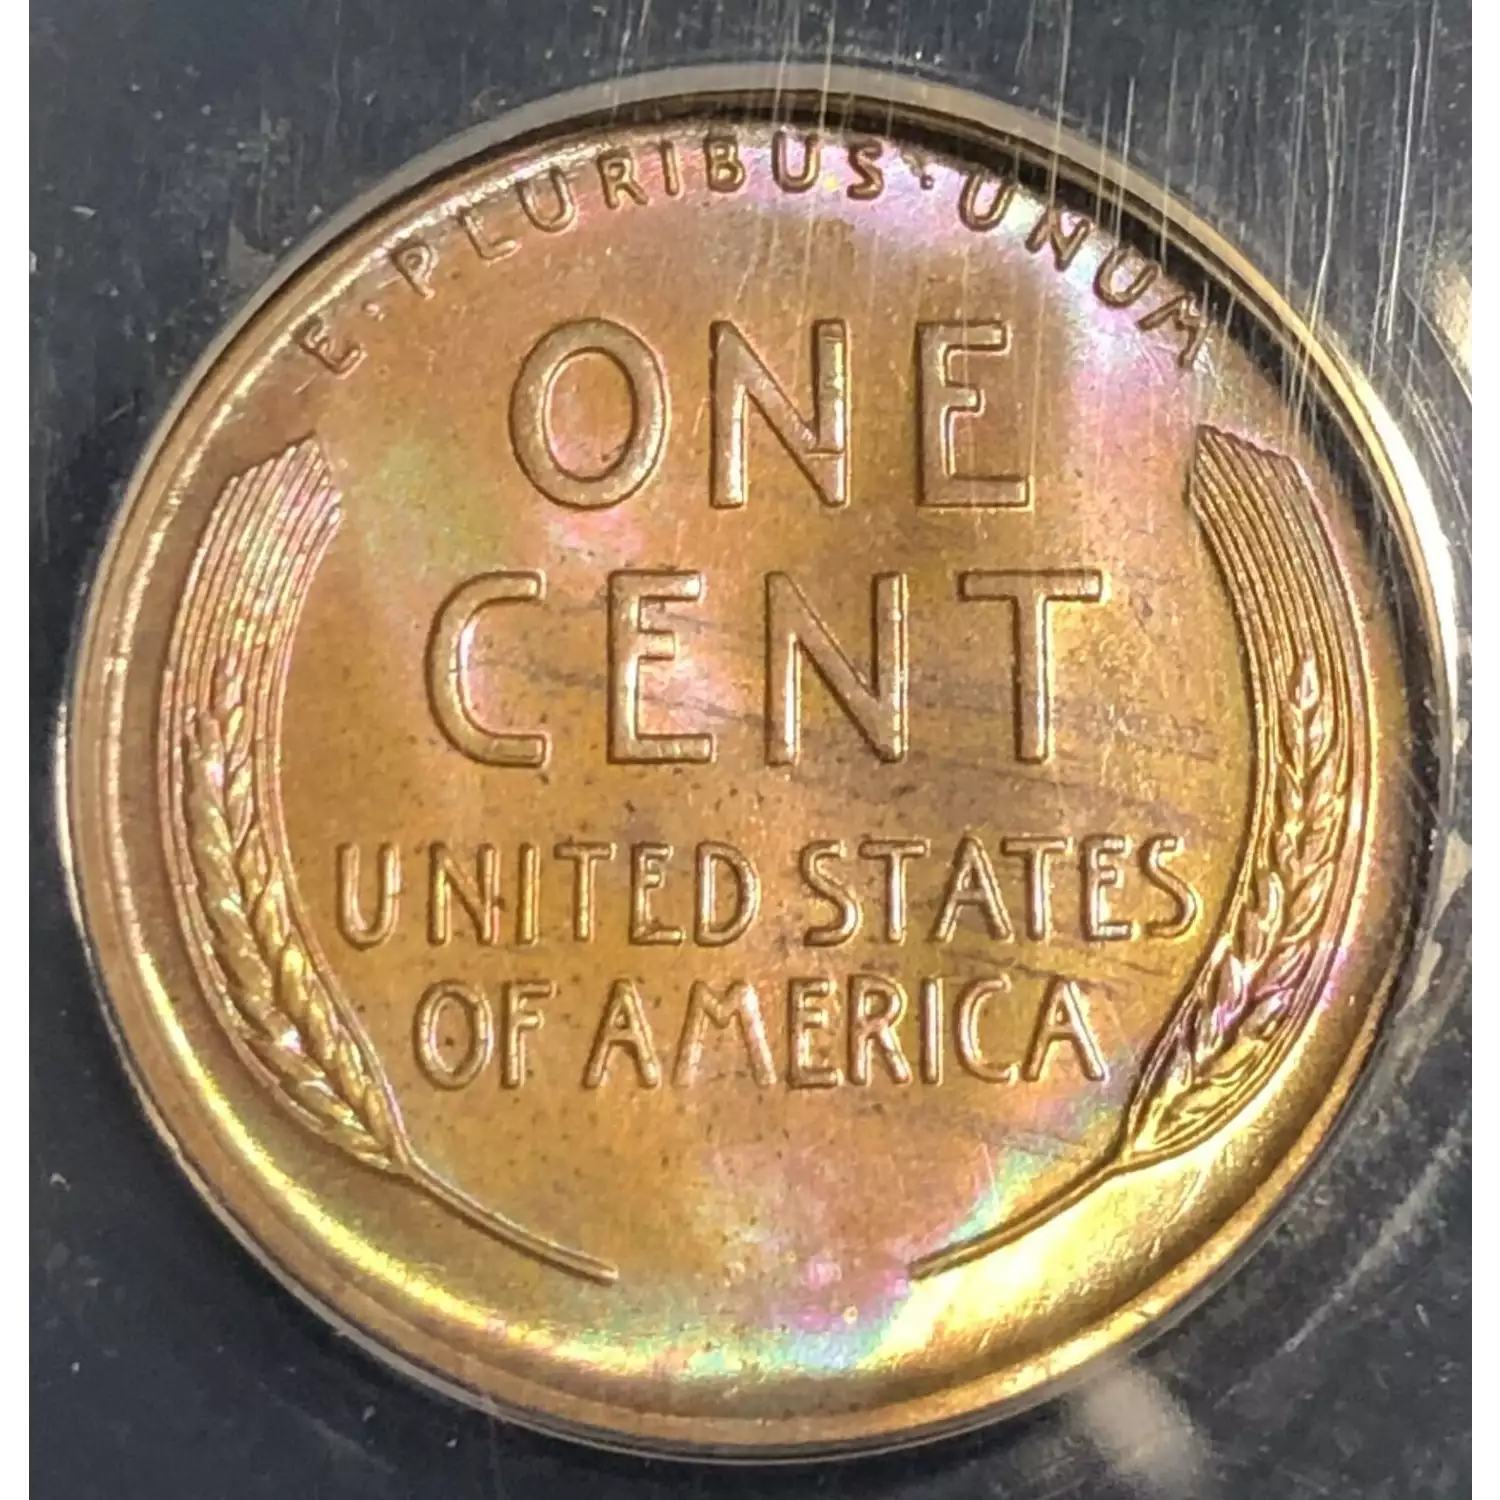 Small Cents-Lincoln, Wheat Ears Reverse 1909-1958 -Copper